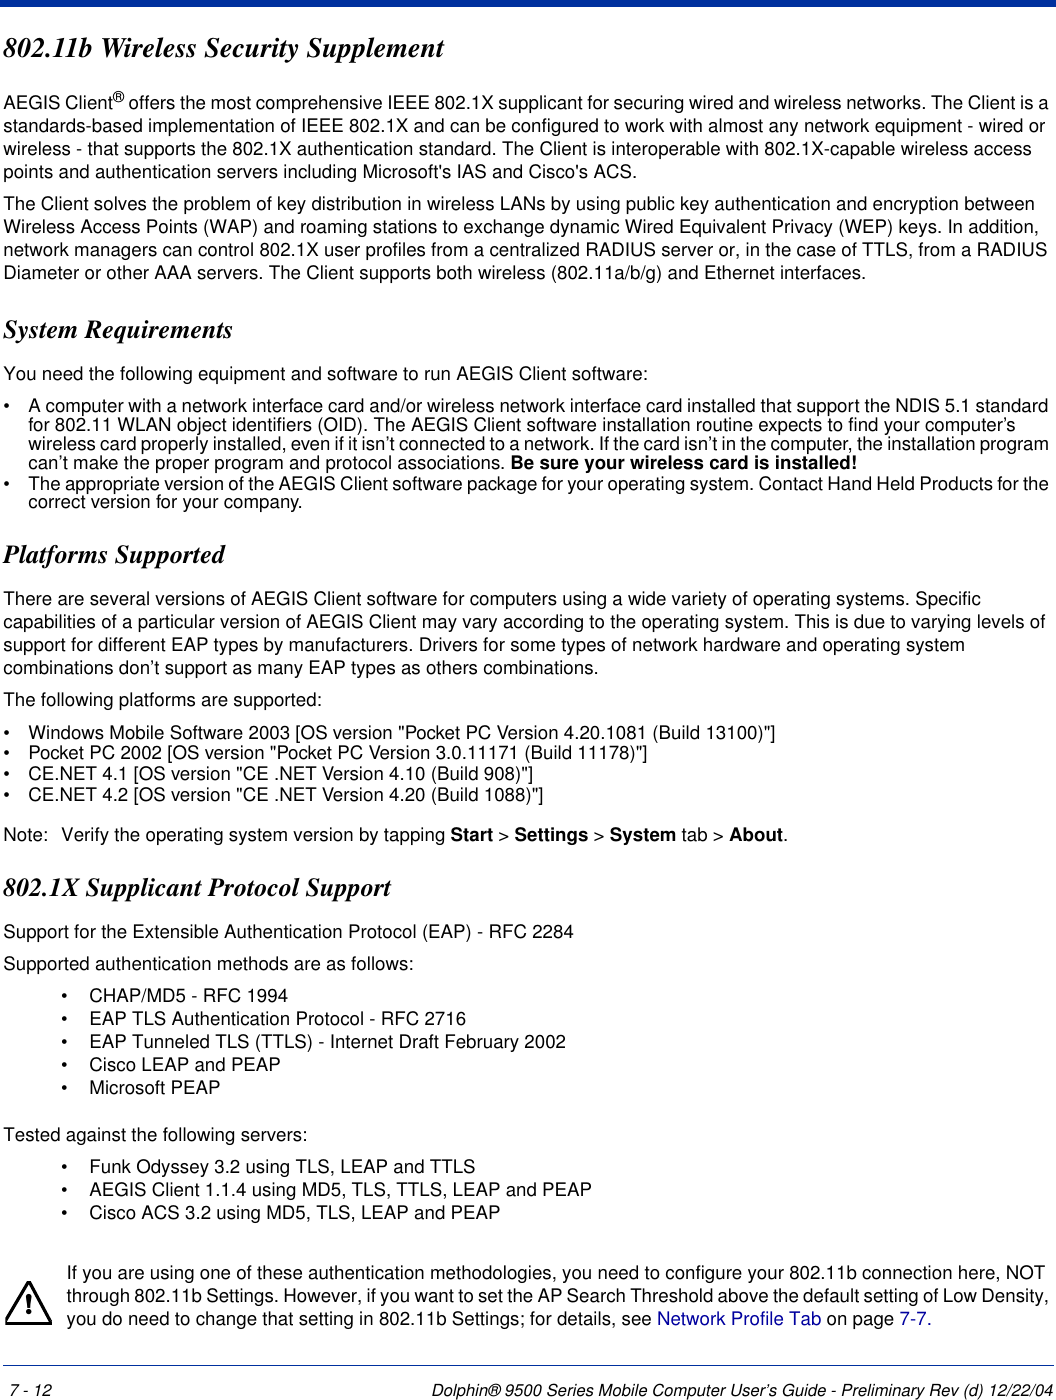 7 - 12 Dolphin® 9500 Series Mobile Computer User’s Guide - Preliminary Rev (d) 12/22/04802.11b Wireless Security SupplementAEGIS Client® offers the most comprehensive IEEE 802.1X supplicant for securing wired and wireless networks. The Client is a standards-based implementation of IEEE 802.1X and can be configured to work with almost any network equipment - wired or wireless - that supports the 802.1X authentication standard. The Client is interoperable with 802.1X-capable wireless access points and authentication servers including Microsoft&apos;s IAS and Cisco&apos;s ACS.The Client solves the problem of key distribution in wireless LANs by using public key authentication and encryption between Wireless Access Points (WAP) and roaming stations to exchange dynamic Wired Equivalent Privacy (WEP) keys. In addition, network managers can control 802.1X user profiles from a centralized RADIUS server or, in the case of TTLS, from a RADIUS Diameter or other AAA servers. The Client supports both wireless (802.11a/b/g) and Ethernet interfaces. System RequirementsYou need the following equipment and software to run AEGIS Client software:•           A computer with a network interface card and/or wireless network interface card installed that support the NDIS 5.1 standard for 802.11 WLAN object identifiers (OID). The AEGIS Client software installation routine expects to find your computer’s wireless card properly installed, even if it isn’t connected to a network. If the card isn’t in the computer, the installation program can’t make the proper program and protocol associations. Be sure your wireless card is installed!•           The appropriate version of the AEGIS Client software package for your operating system. Contact Hand Held Products for the correct version for your company.Platforms SupportedThere are several versions of AEGIS Client software for computers using a wide variety of operating systems. Specific capabilities of a particular version of AEGIS Client may vary according to the operating system. This is due to varying levels of support for different EAP types by manufacturers. Drivers for some types of network hardware and operating system combinations don’t support as many EAP types as others combinations.The following platforms are supported:•           Windows Mobile Software 2003 [OS version &quot;Pocket PC Version 4.20.1081 (Build 13100)&quot;]•           Pocket PC 2002 [OS version &quot;Pocket PC Version 3.0.11171 (Build 11178)&quot;]•           CE.NET 4.1 [OS version &quot;CE .NET Version 4.10 (Build 908)&quot;]•           CE.NET 4.2 [OS version &quot;CE .NET Version 4.20 (Build 1088)&quot;] Note: Verify the operating system version by tapping Start &gt; Settings &gt; System tab &gt; About. 802.1X Supplicant Protocol Support Support for the Extensible Authentication Protocol (EAP) - RFC 2284Supported authentication methods are as follows: •             CHAP/MD5 - RFC 1994 •             EAP TLS Authentication Protocol - RFC 2716 •             EAP Tunneled TLS (TTLS) - Internet Draft February 2002 •             Cisco LEAP and PEAP•             Microsoft PEAP  Tested against the following servers:•             Funk Odyssey 3.2 using TLS, LEAP and TTLS •             AEGIS Client 1.1.4 using MD5, TLS, TTLS, LEAP and PEAP •             Cisco ACS 3.2 using MD5, TLS, LEAP and PEAP If you are using one of these authentication methodologies, you need to configure your 802.11b connection here, NOT through 802.11b Settings. However, if you want to set the AP Search Threshold above the default setting of Low Density, you do need to change that setting in 802.11b Settings; for details, see Network Profile Tab on page 7-7.!